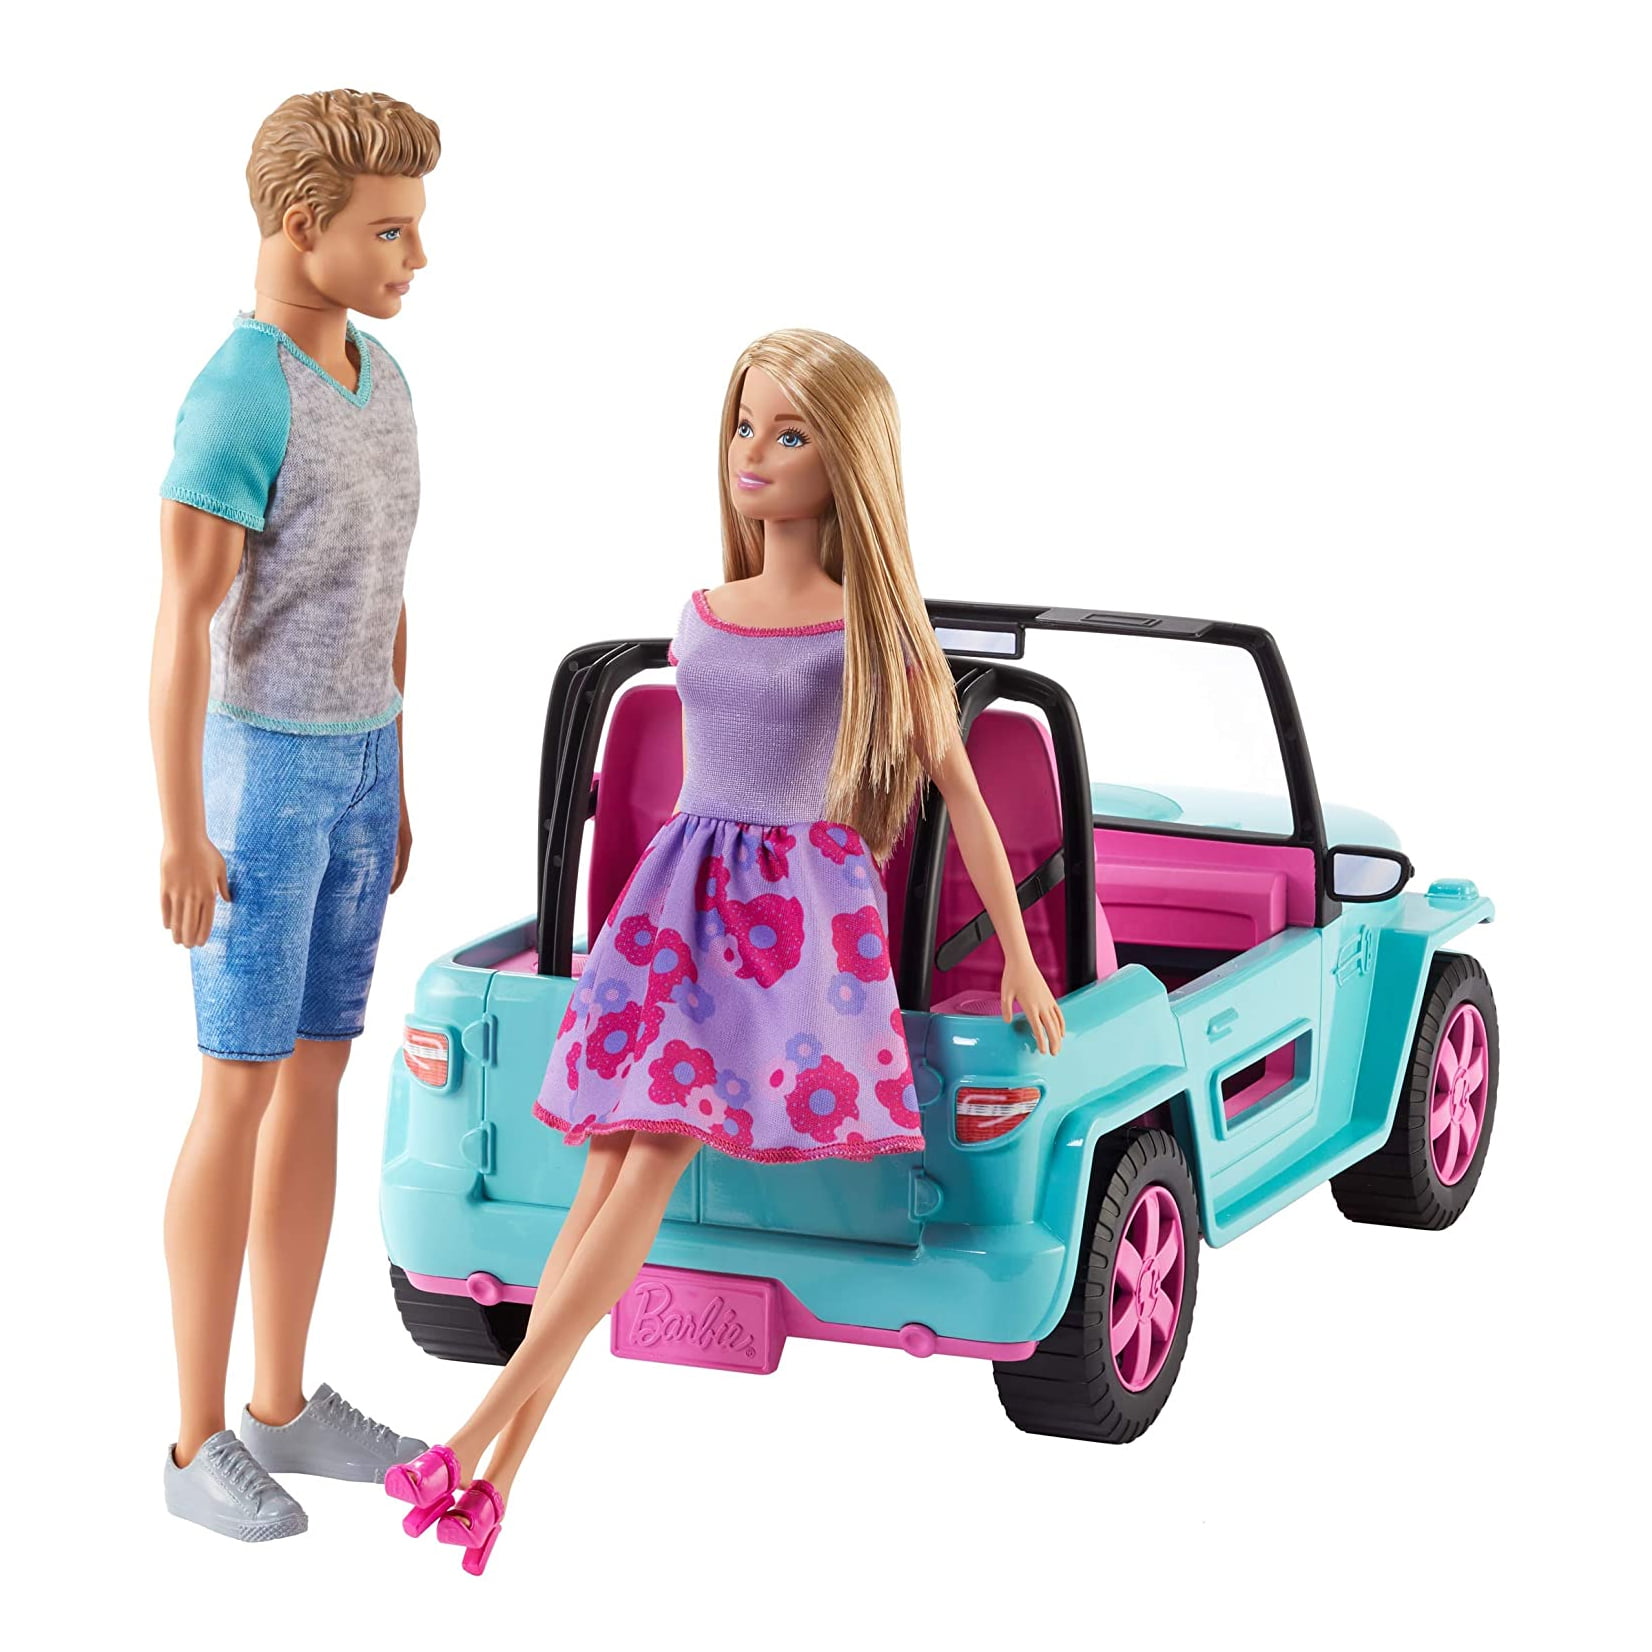 Aan Perforatie Meisje Barbie Doll and Ken Playset with Off-Road Vehicle, Outfits, and Accessories  - Walmart.com